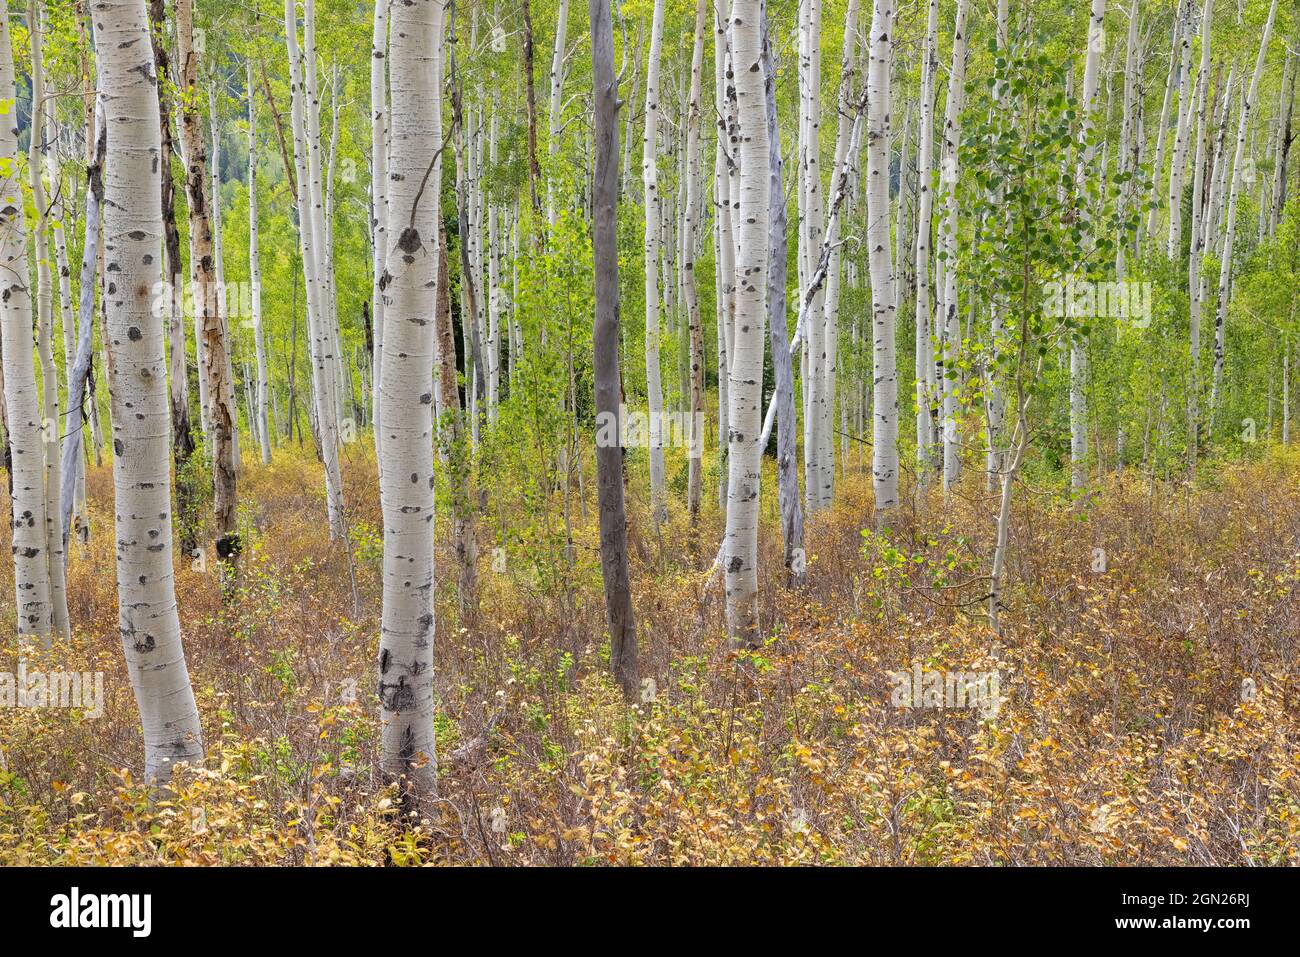 Aspen trees in early fall, Big Cottonwood Canyon, Wasatch Mountains, Utah Stock Photo